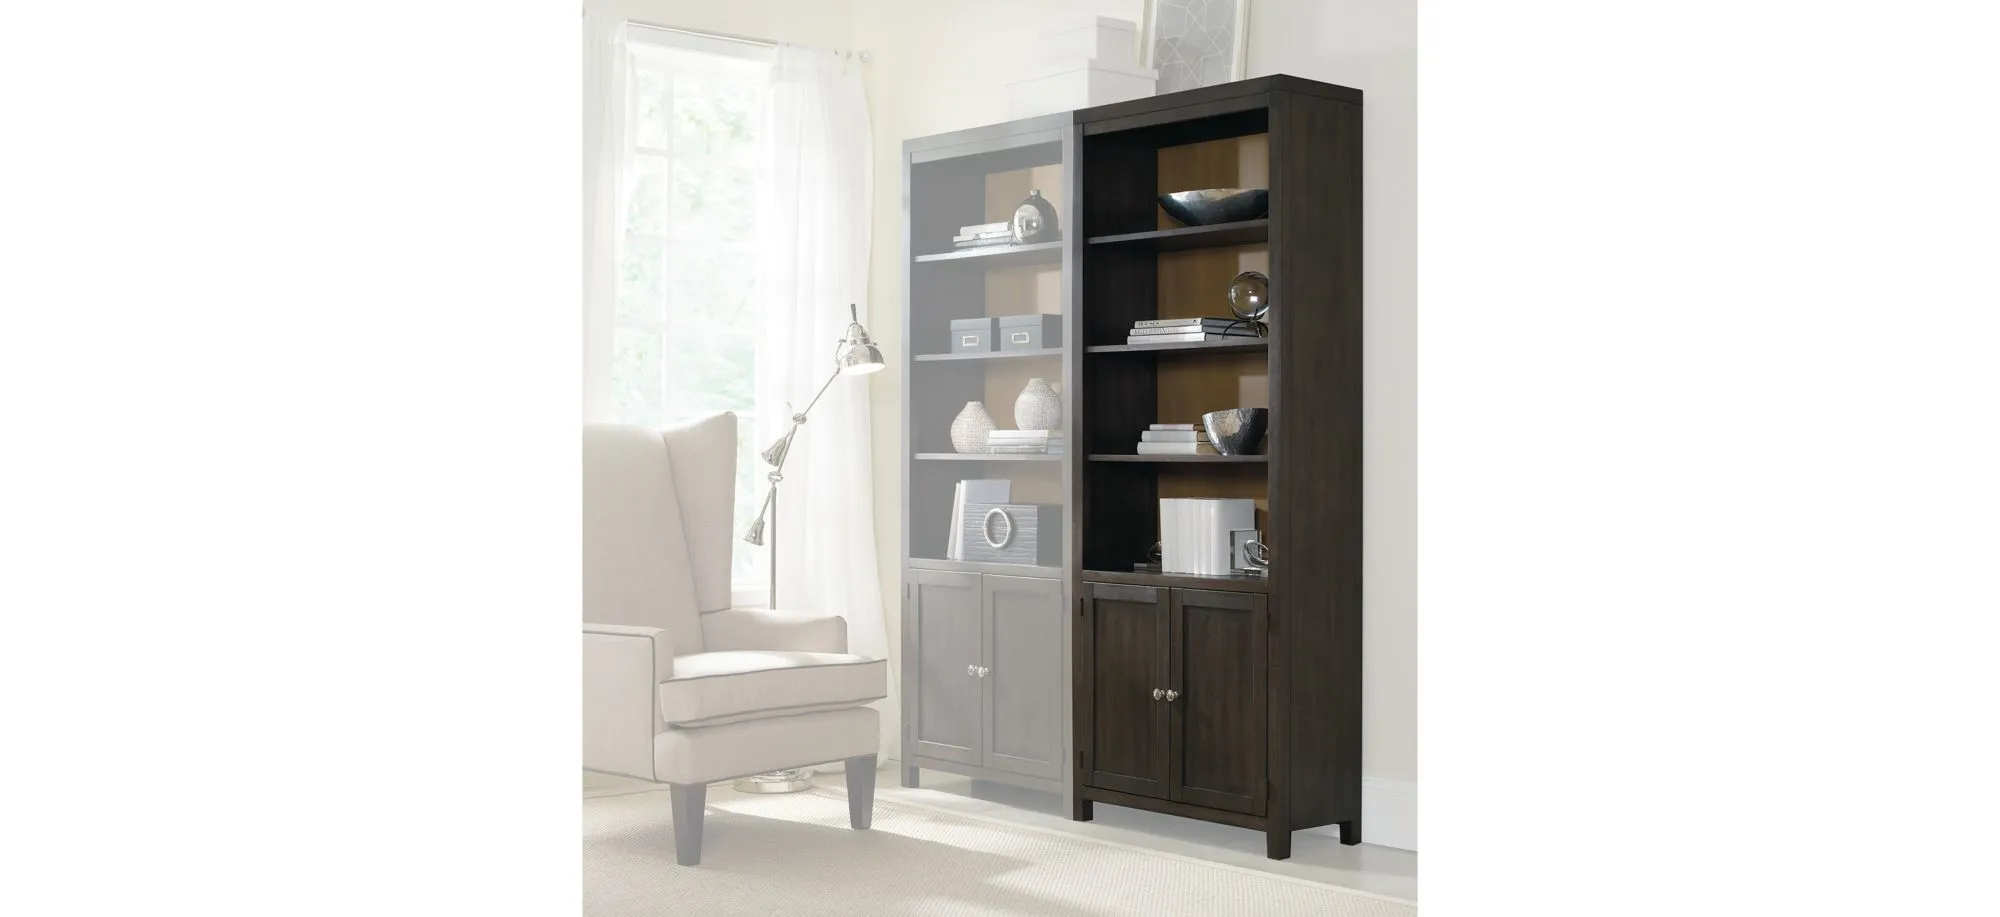 South Park Bunching Bookcase in Grays by Hooker Furniture